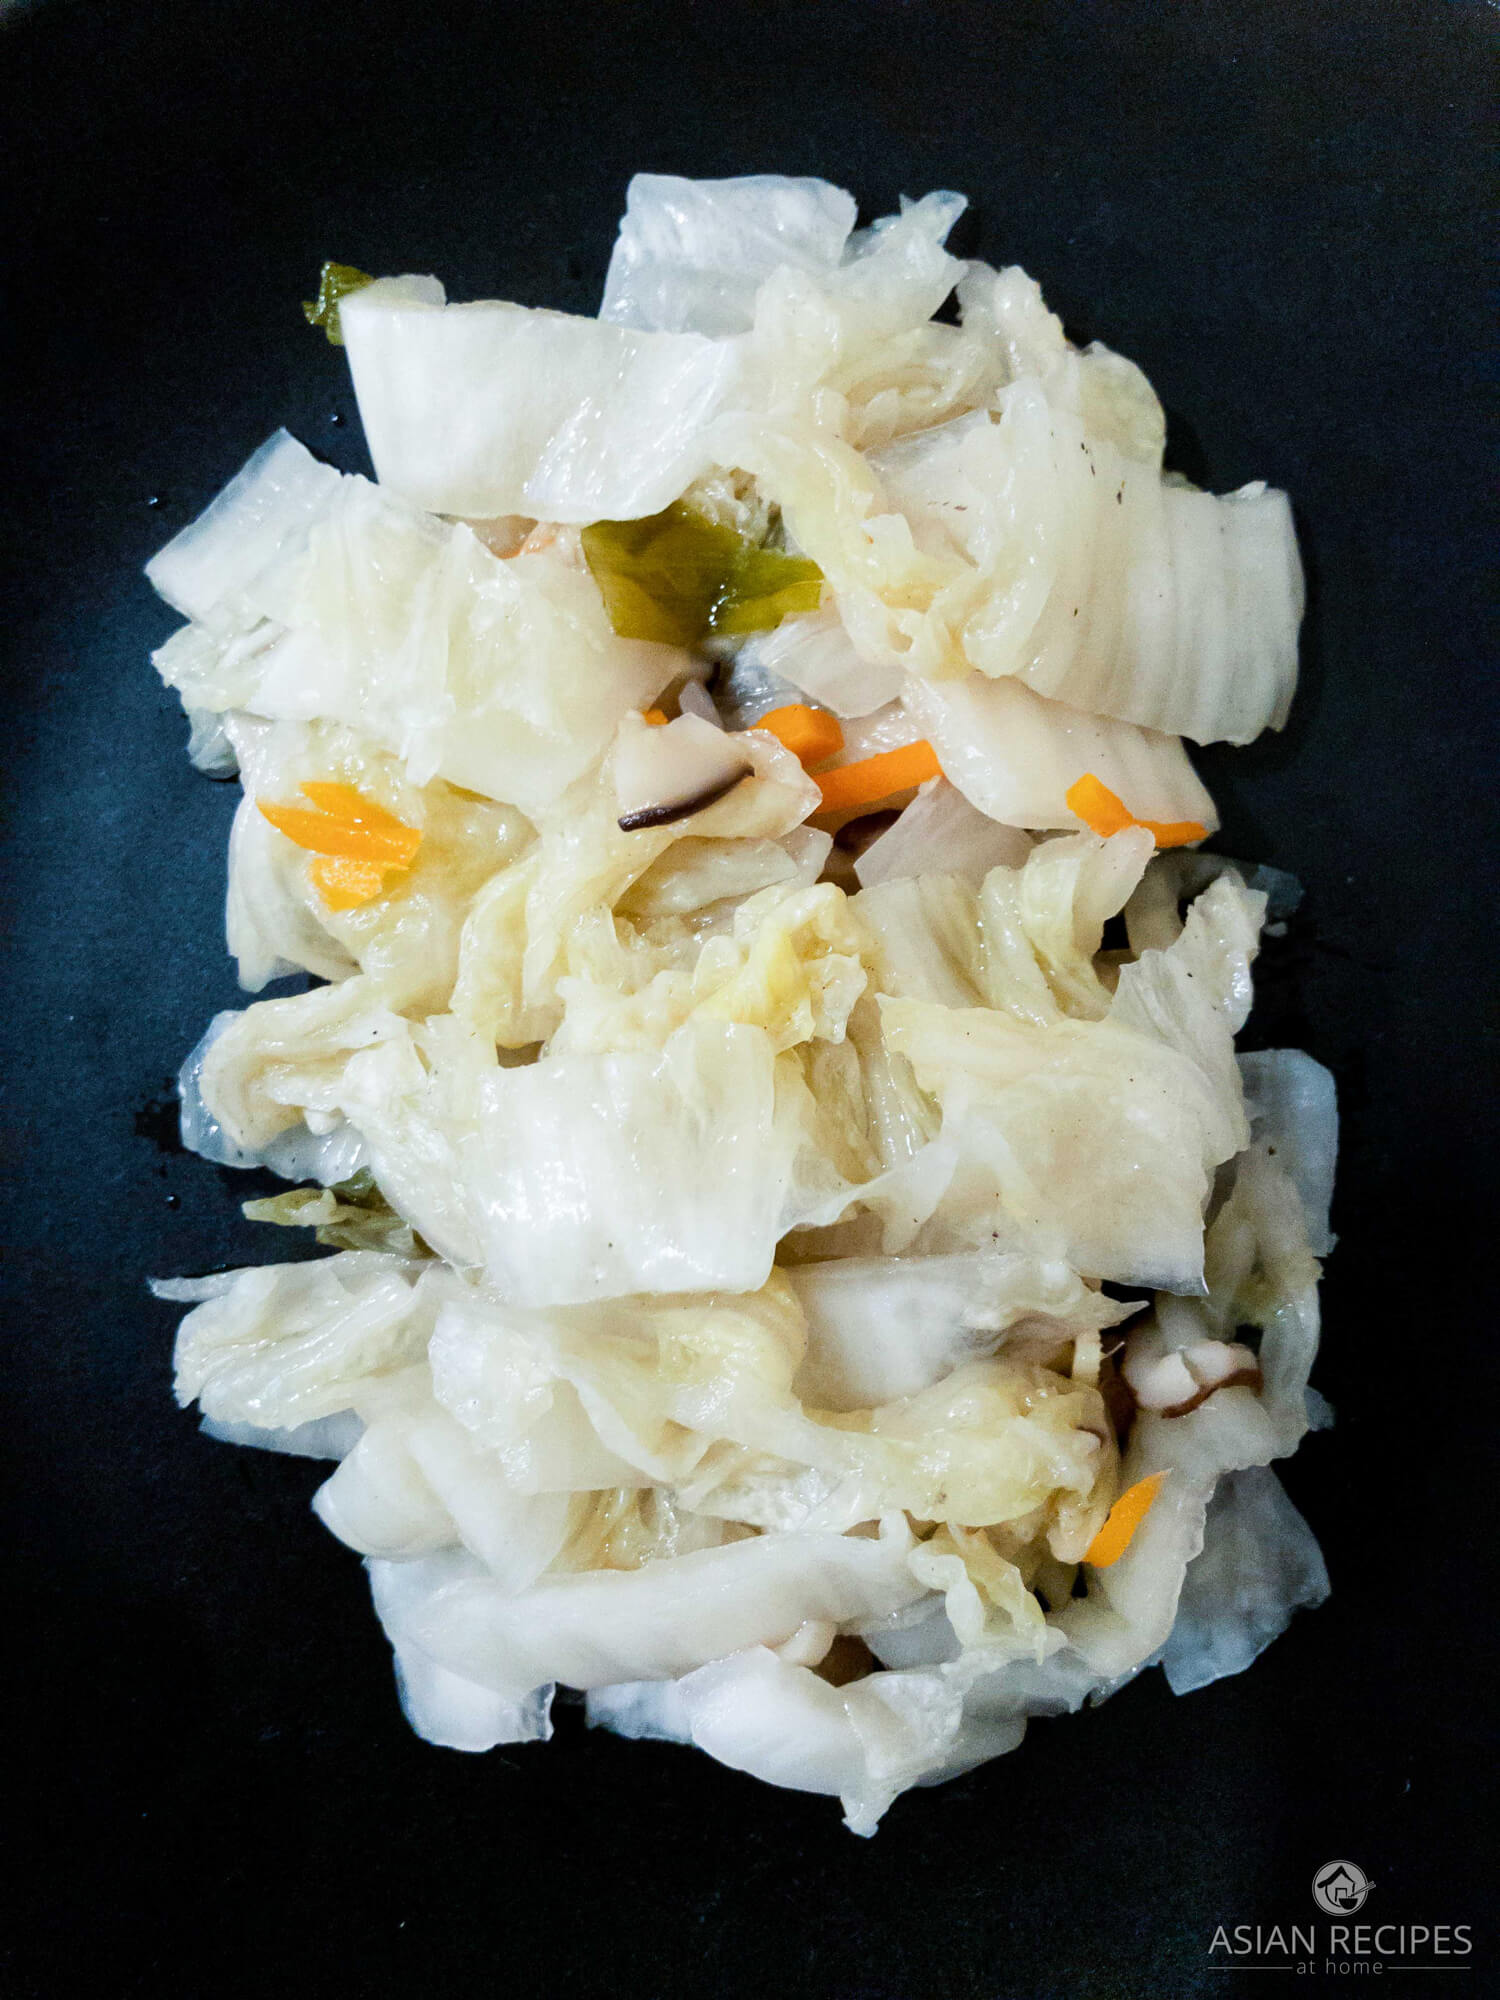 Korean white kimchi (Baek kimchi) is a napa cabbage kimchi that is not spicy and has a clean and refreshing flavor.